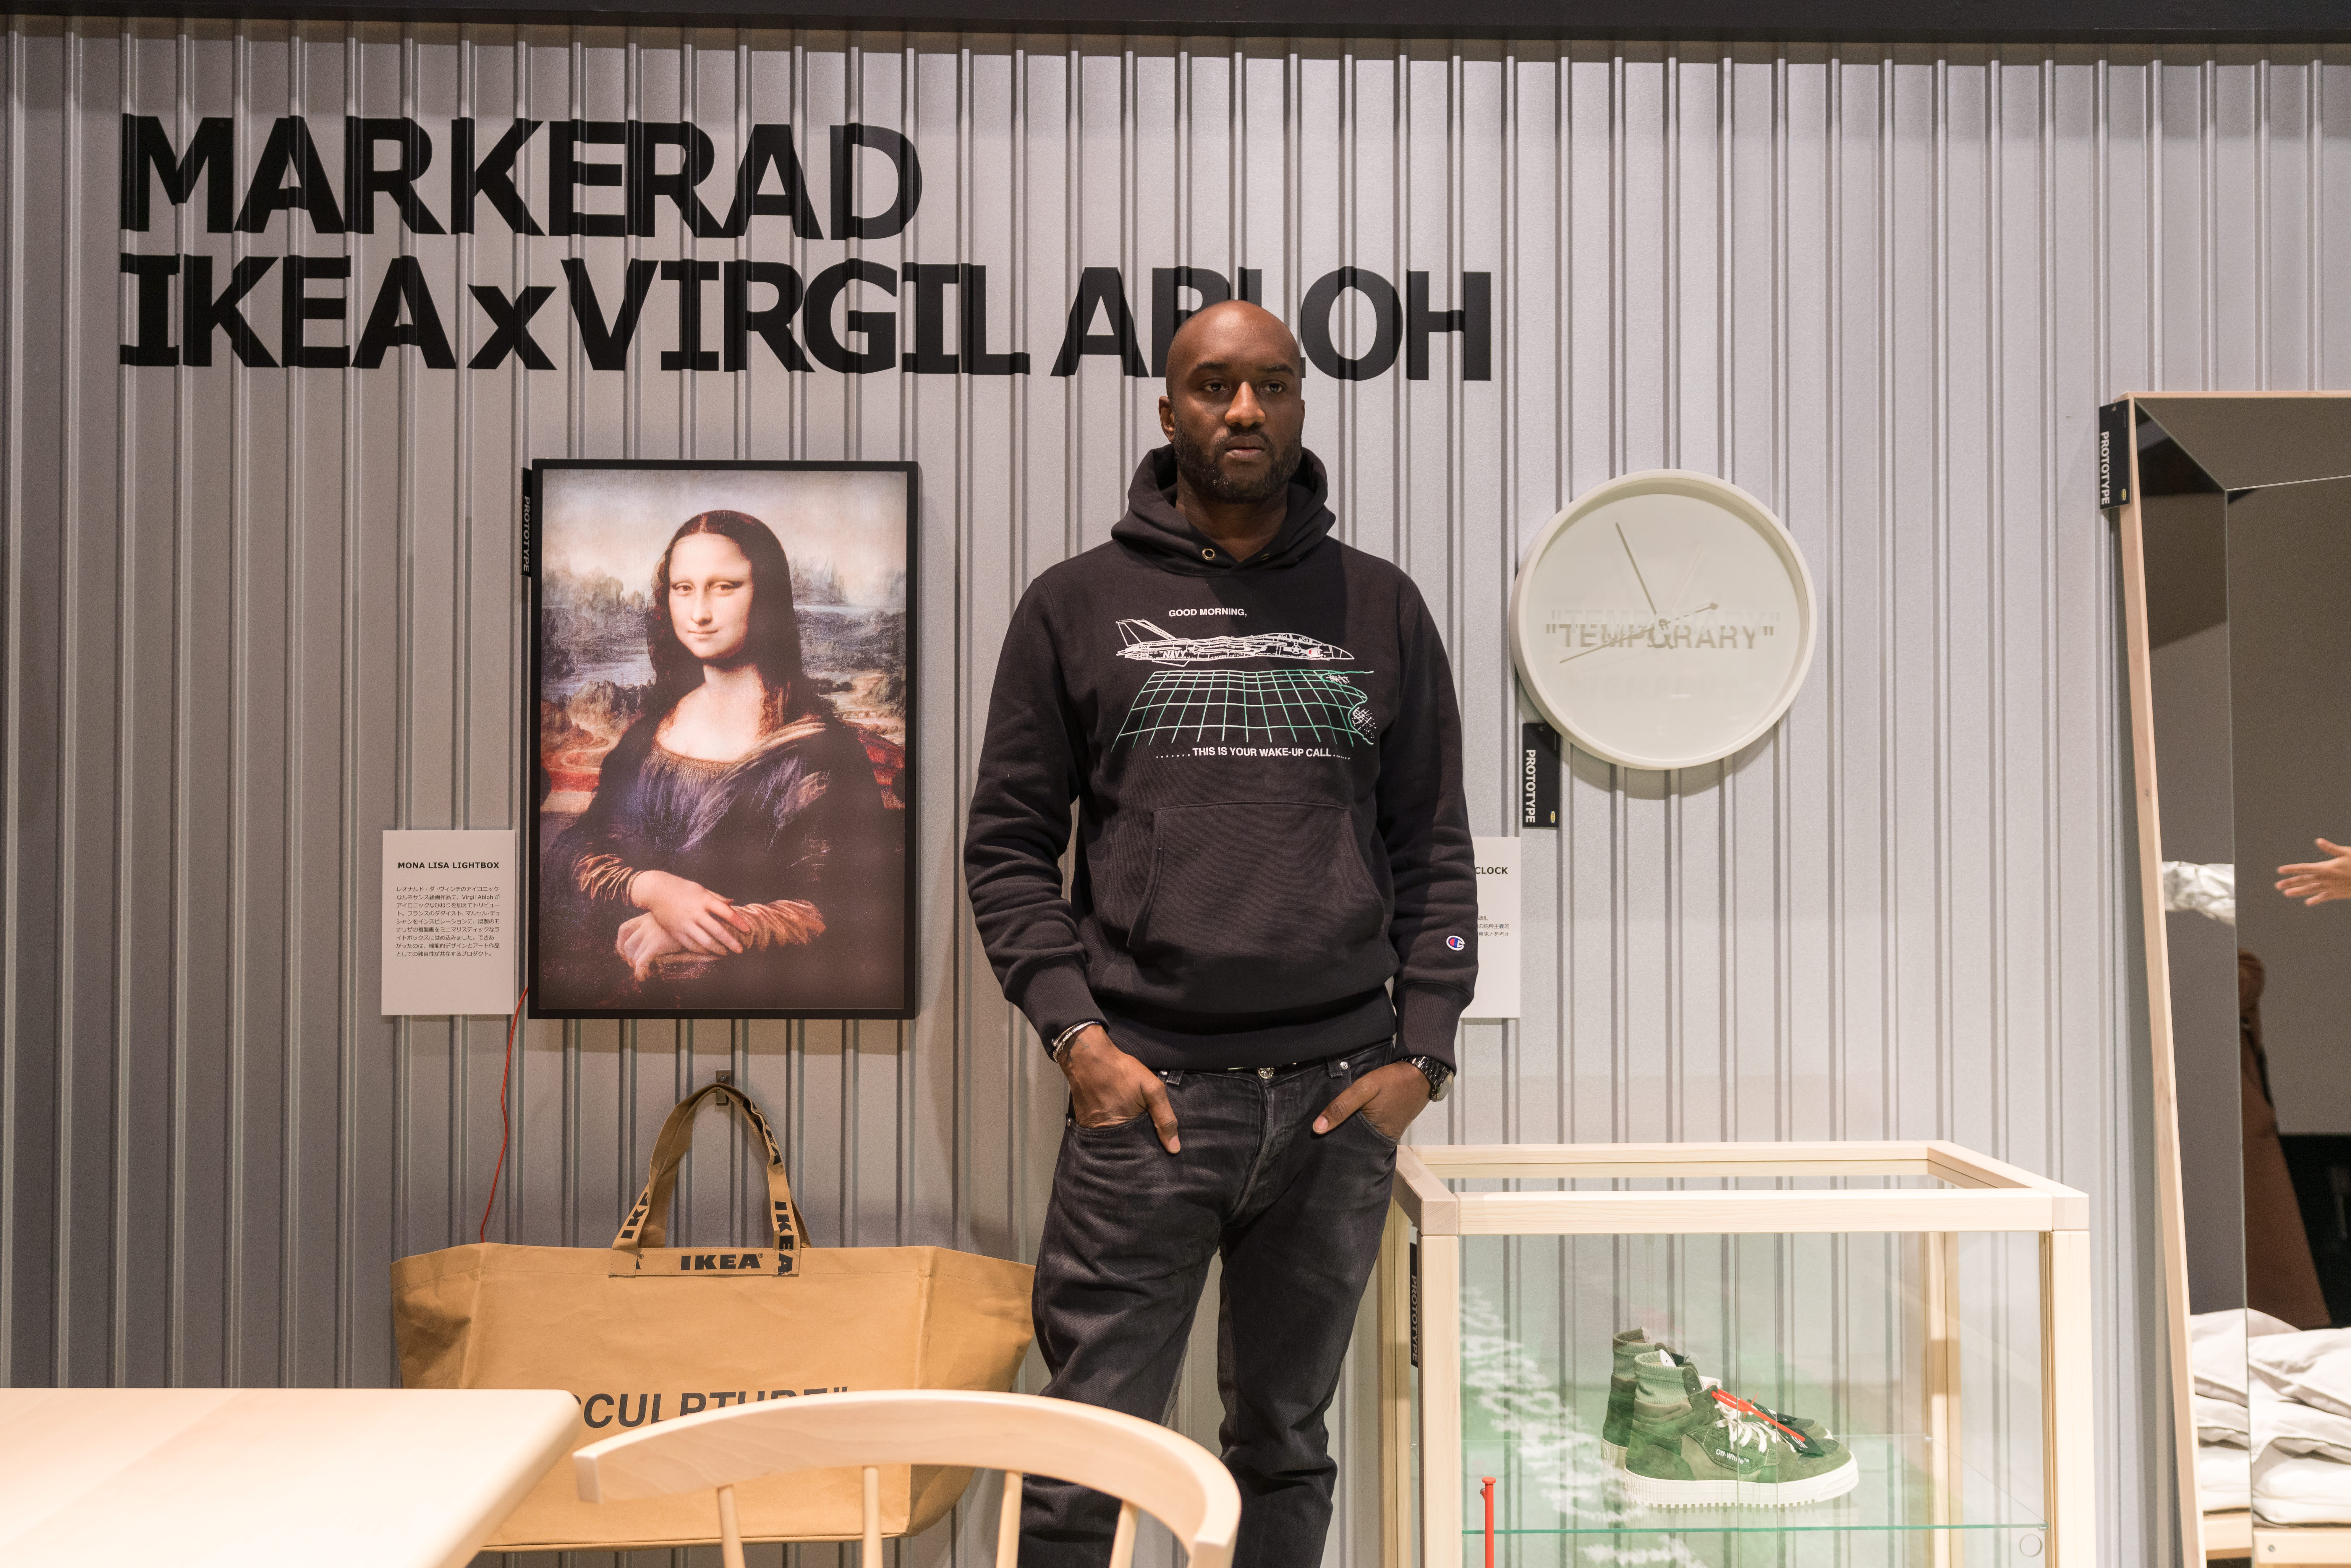 Virgil Abloh will customize his Ikea chair for another BLM auction